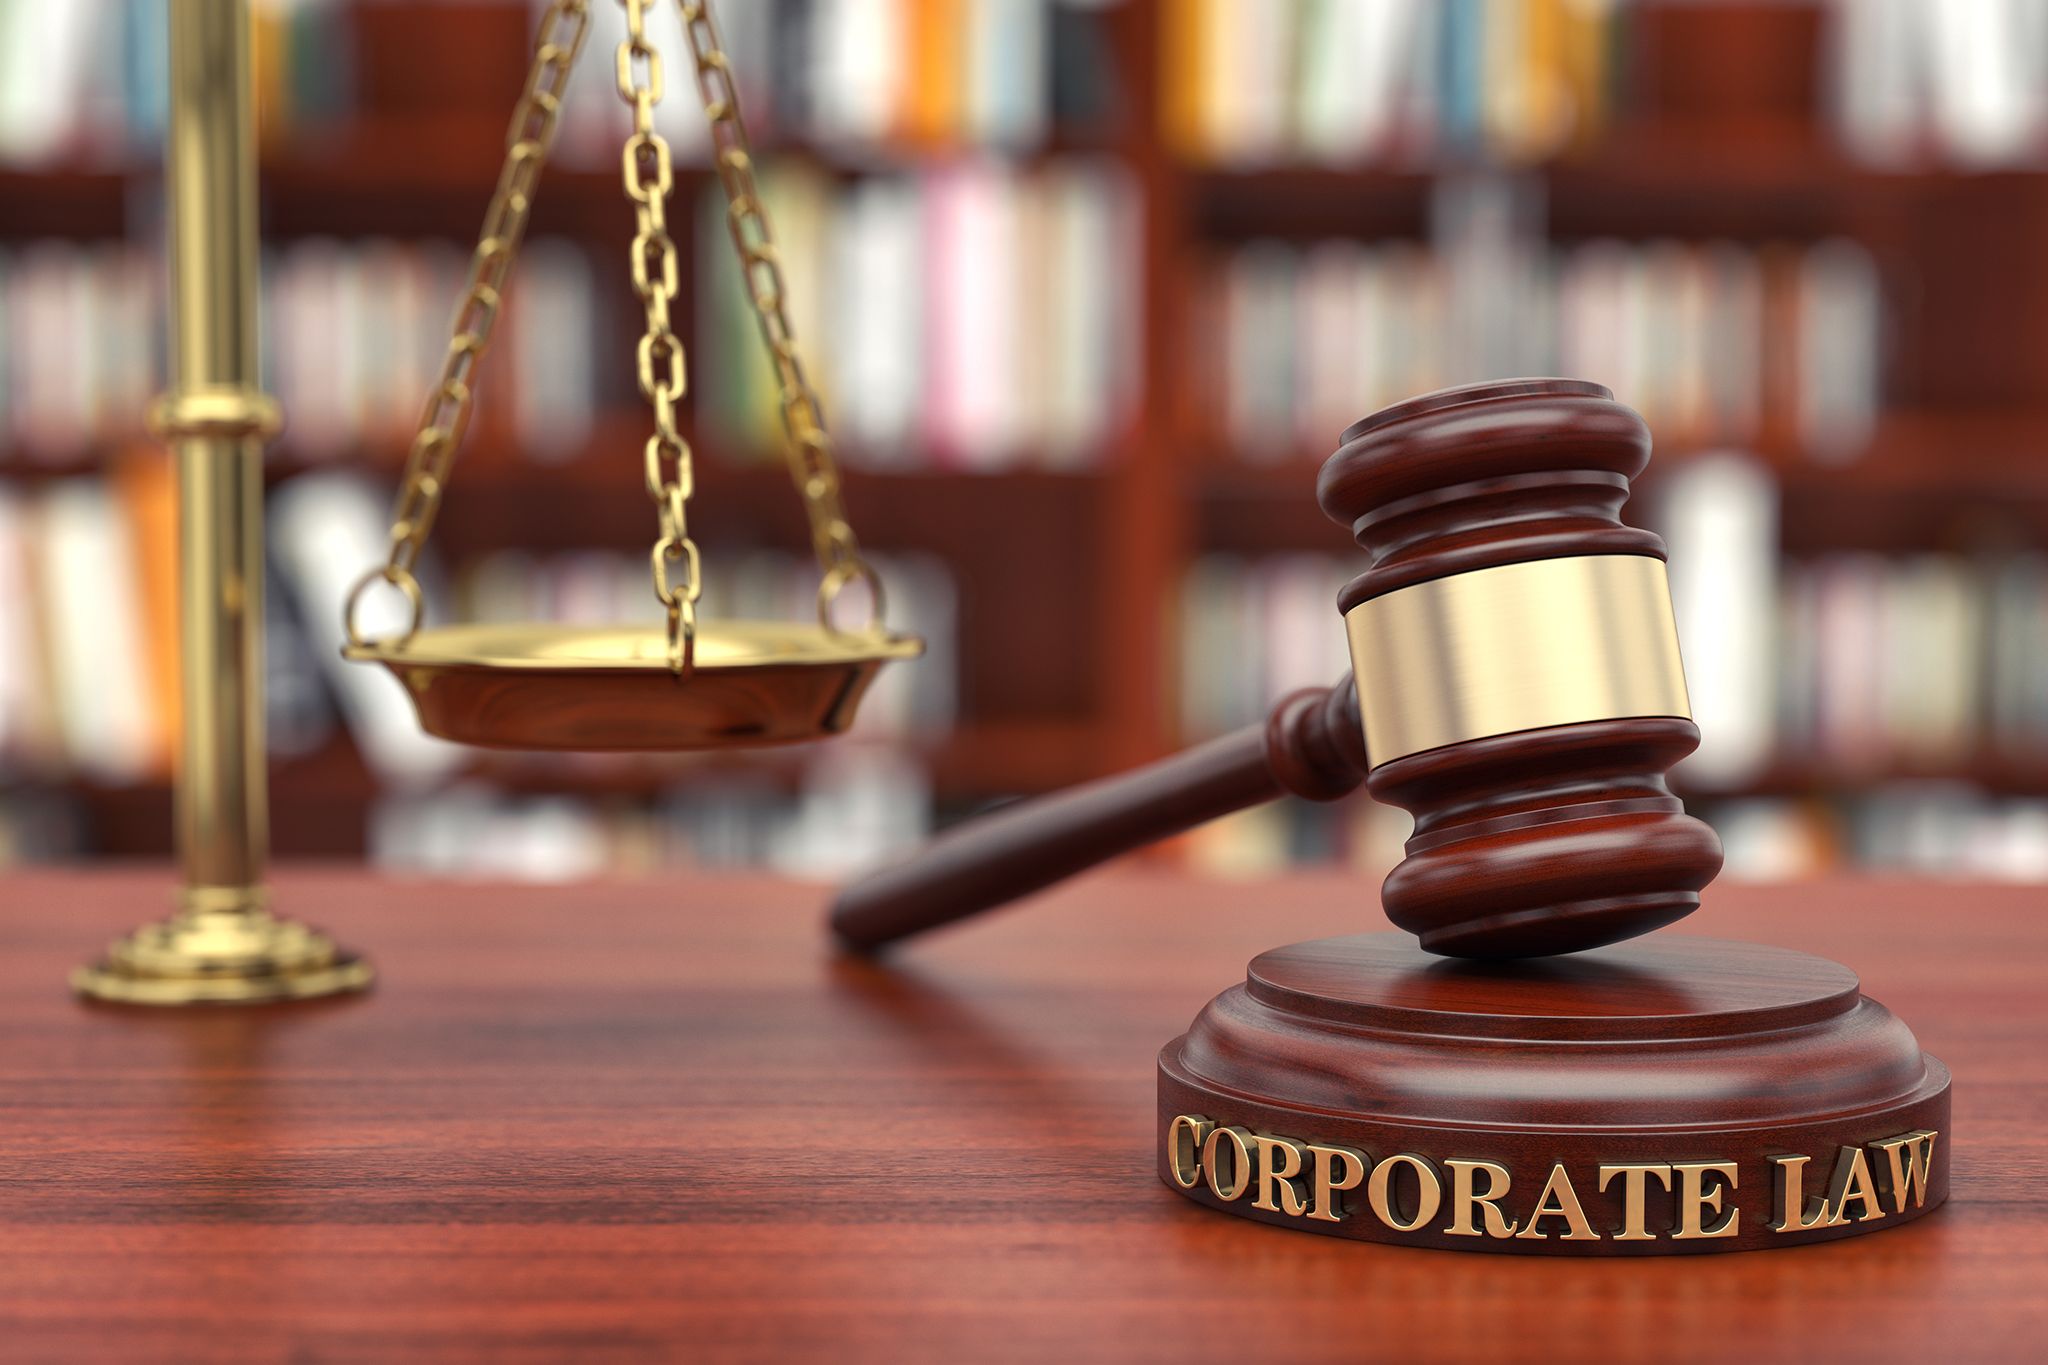 10 Common Business Legal Issues under Corporate Law The Business Gigs